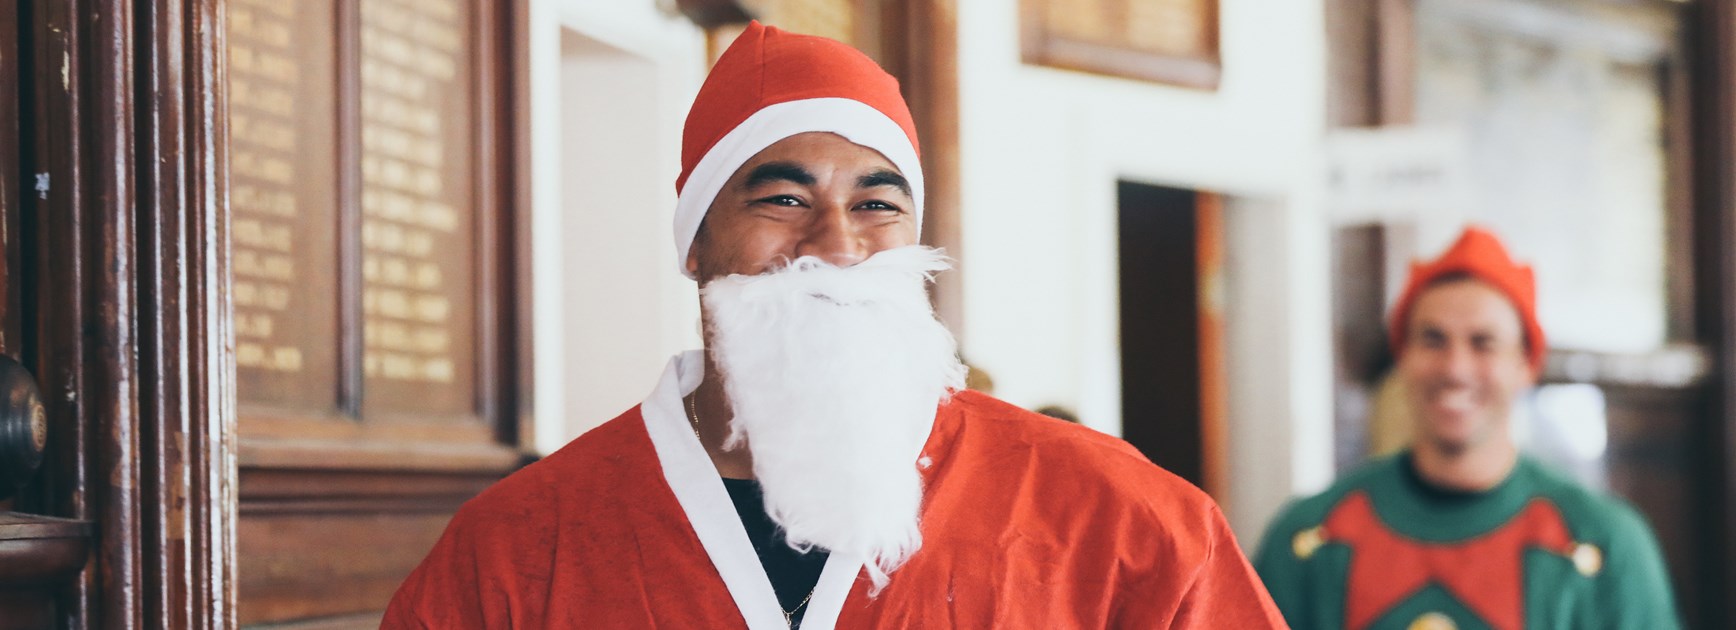 Merry Christmas from Wests Tigers!